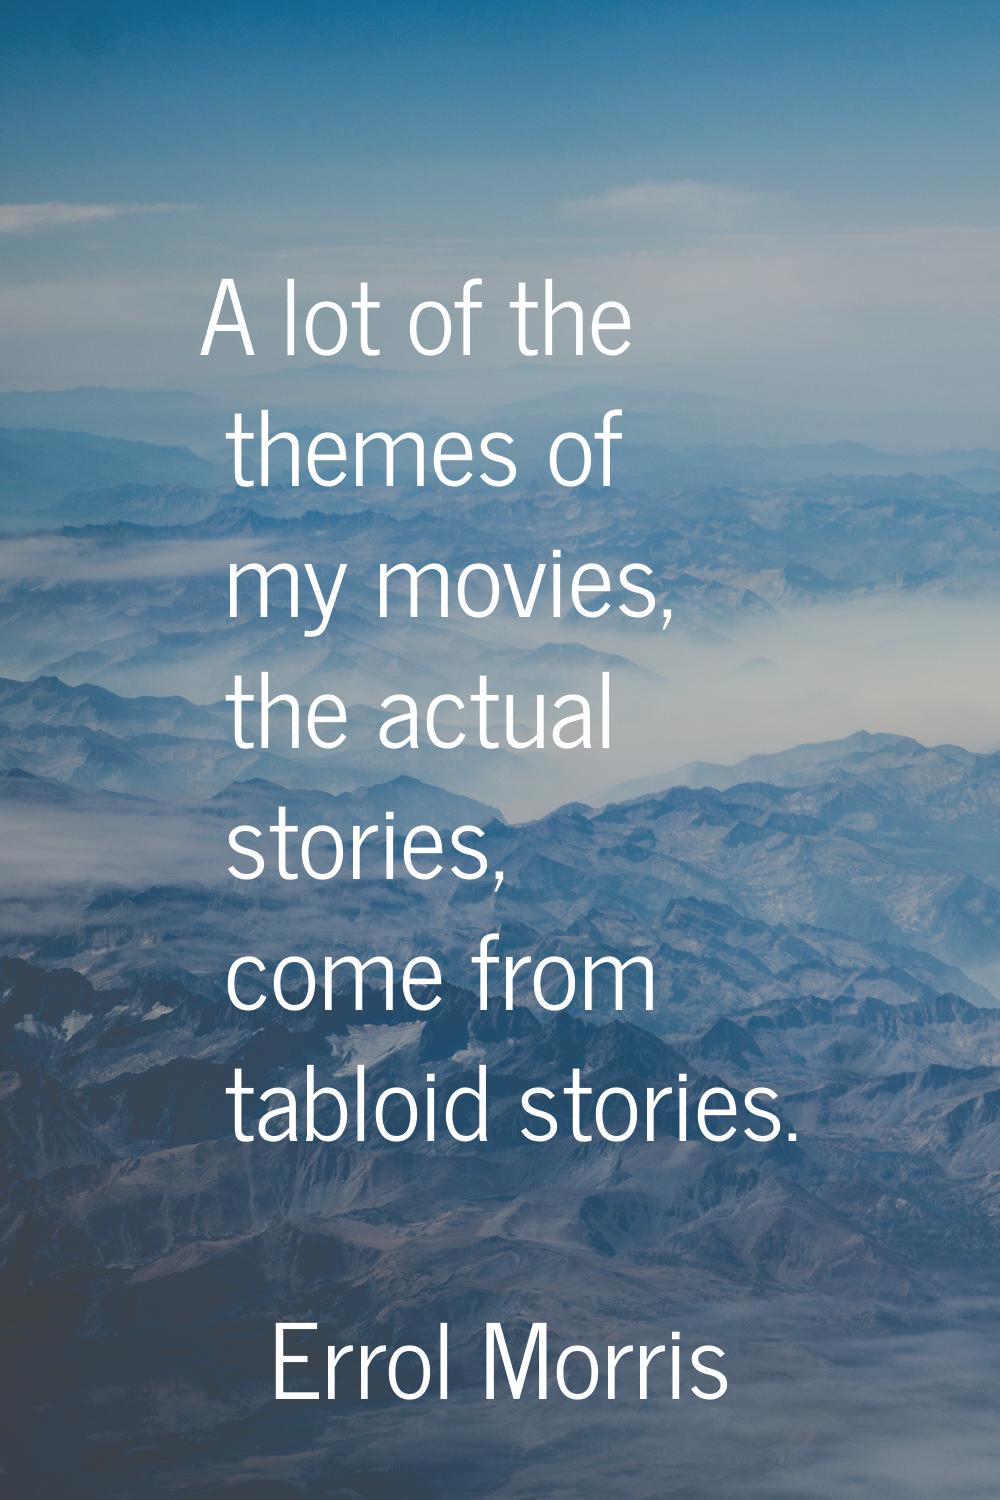 A lot of the themes of my movies, the actual stories, come from tabloid stories.